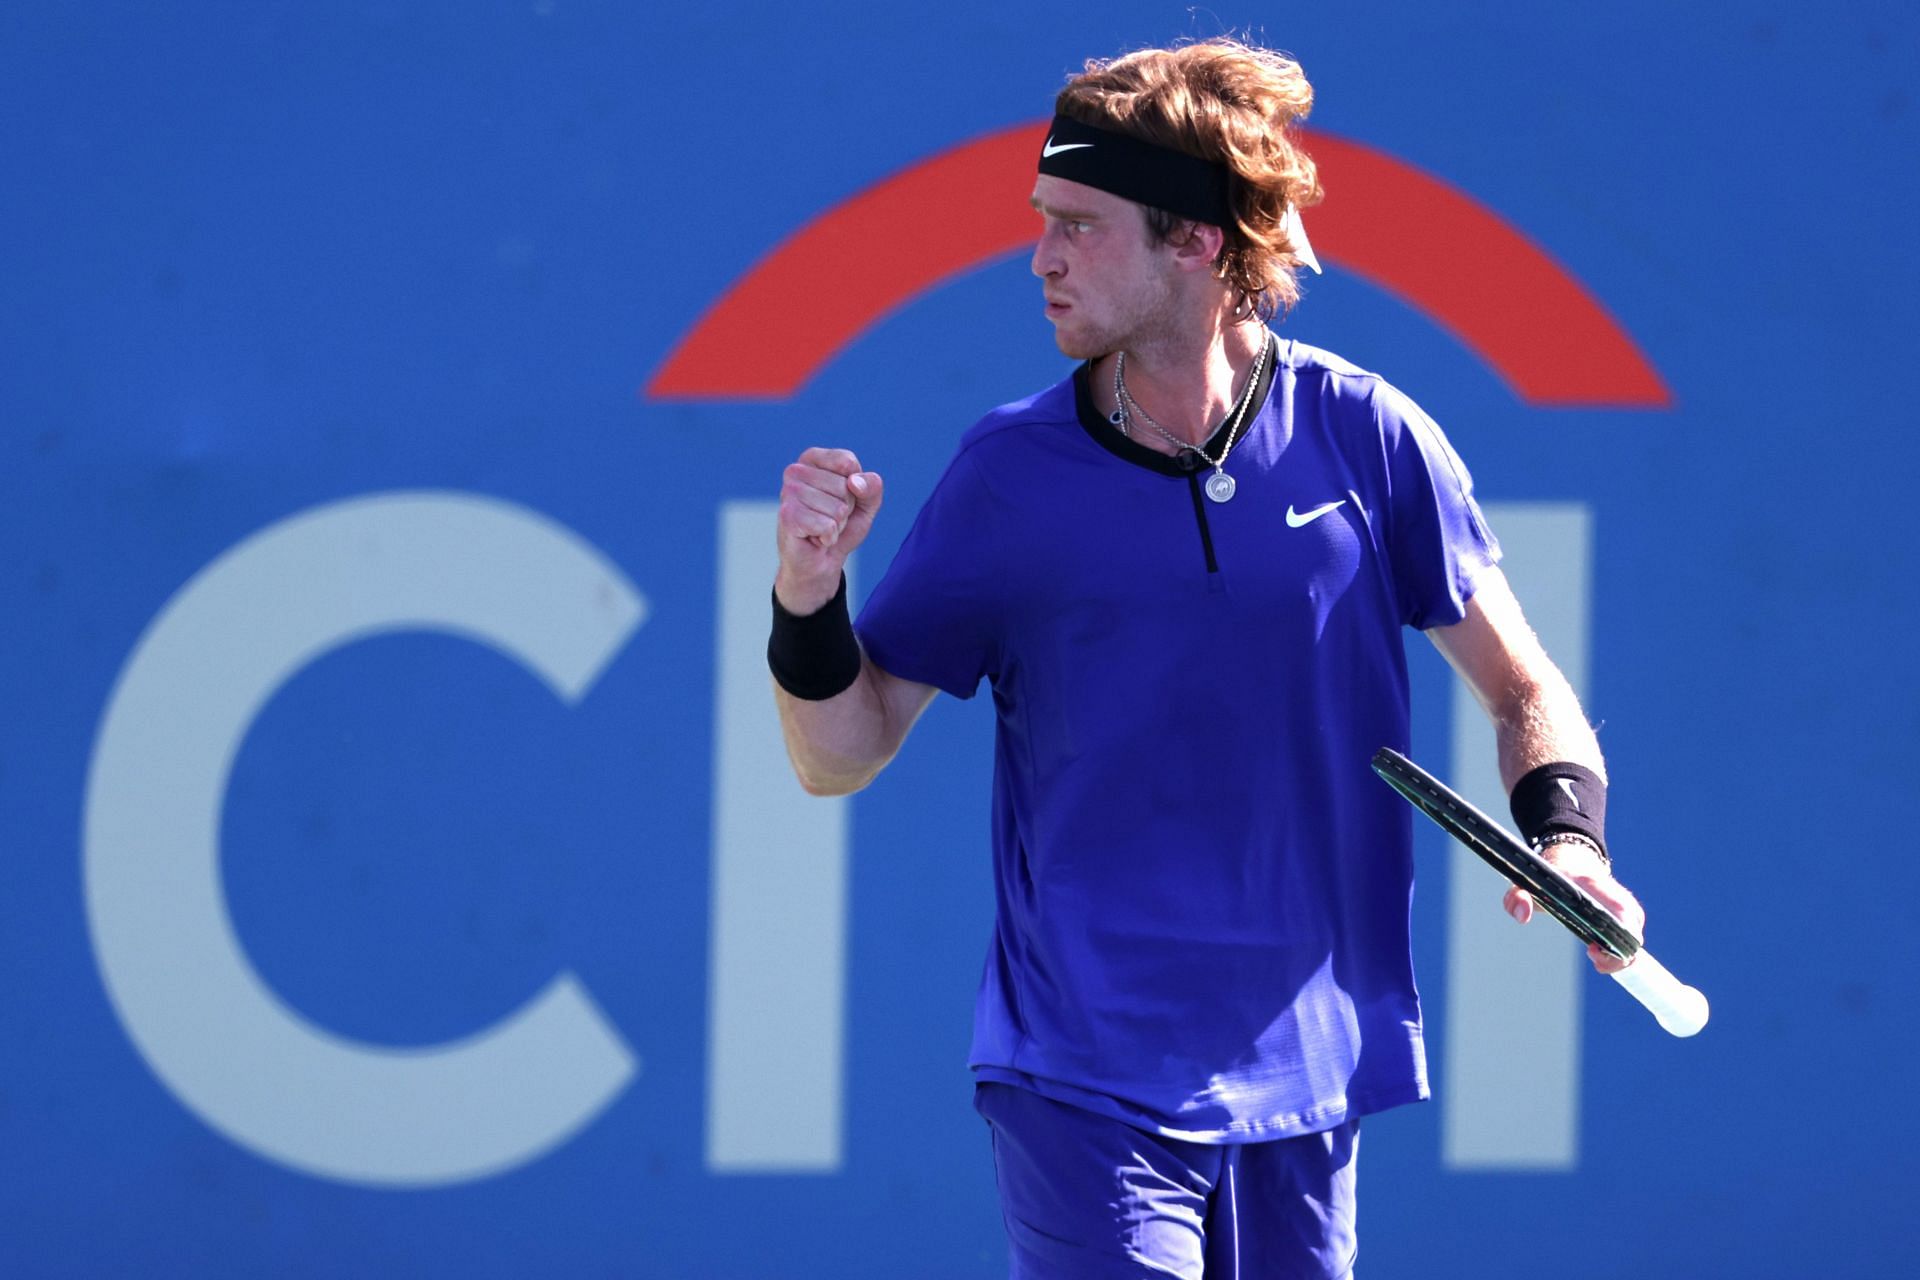 Andrey Rublev at the Citi Open - Day 4